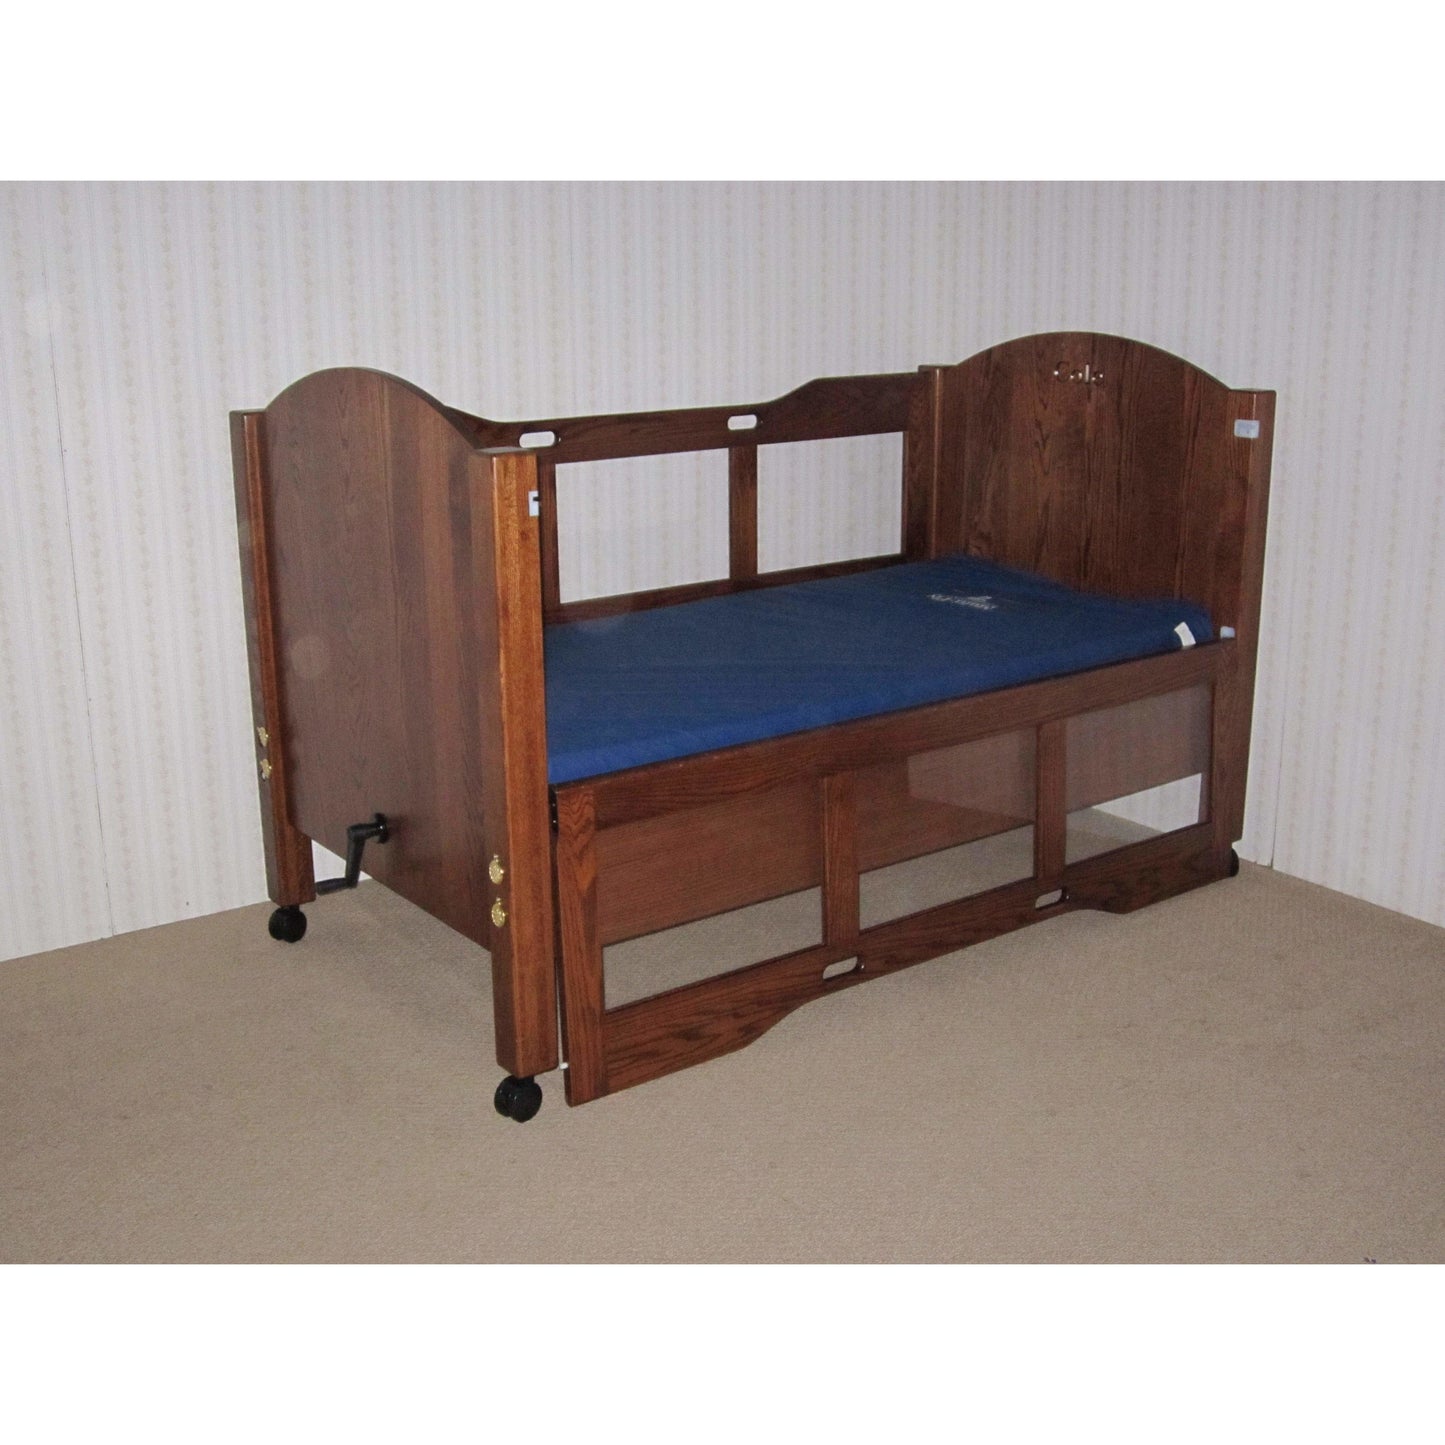 Beds by George Made to order Dream Series Manual Adjustable Head, Twin Size Bed - Standard